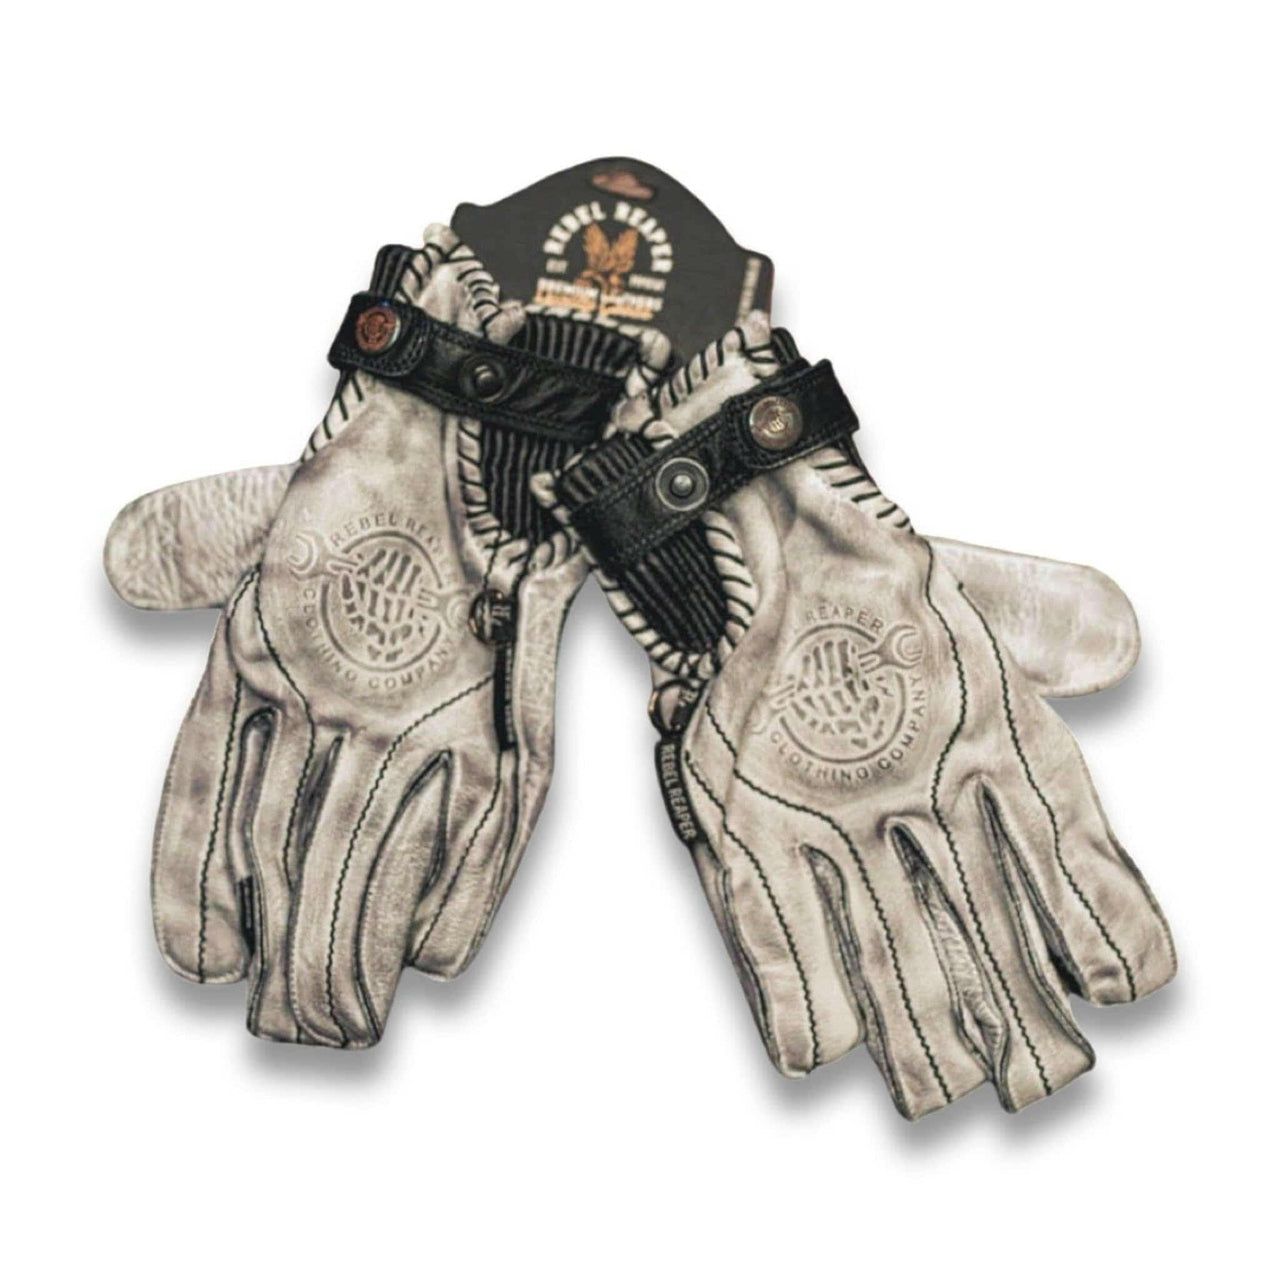 Leather Motorcycle Riding Gloves - Modern Roper - Distressed White - Rebel Reaper Clothing CompanyLeather Gloves